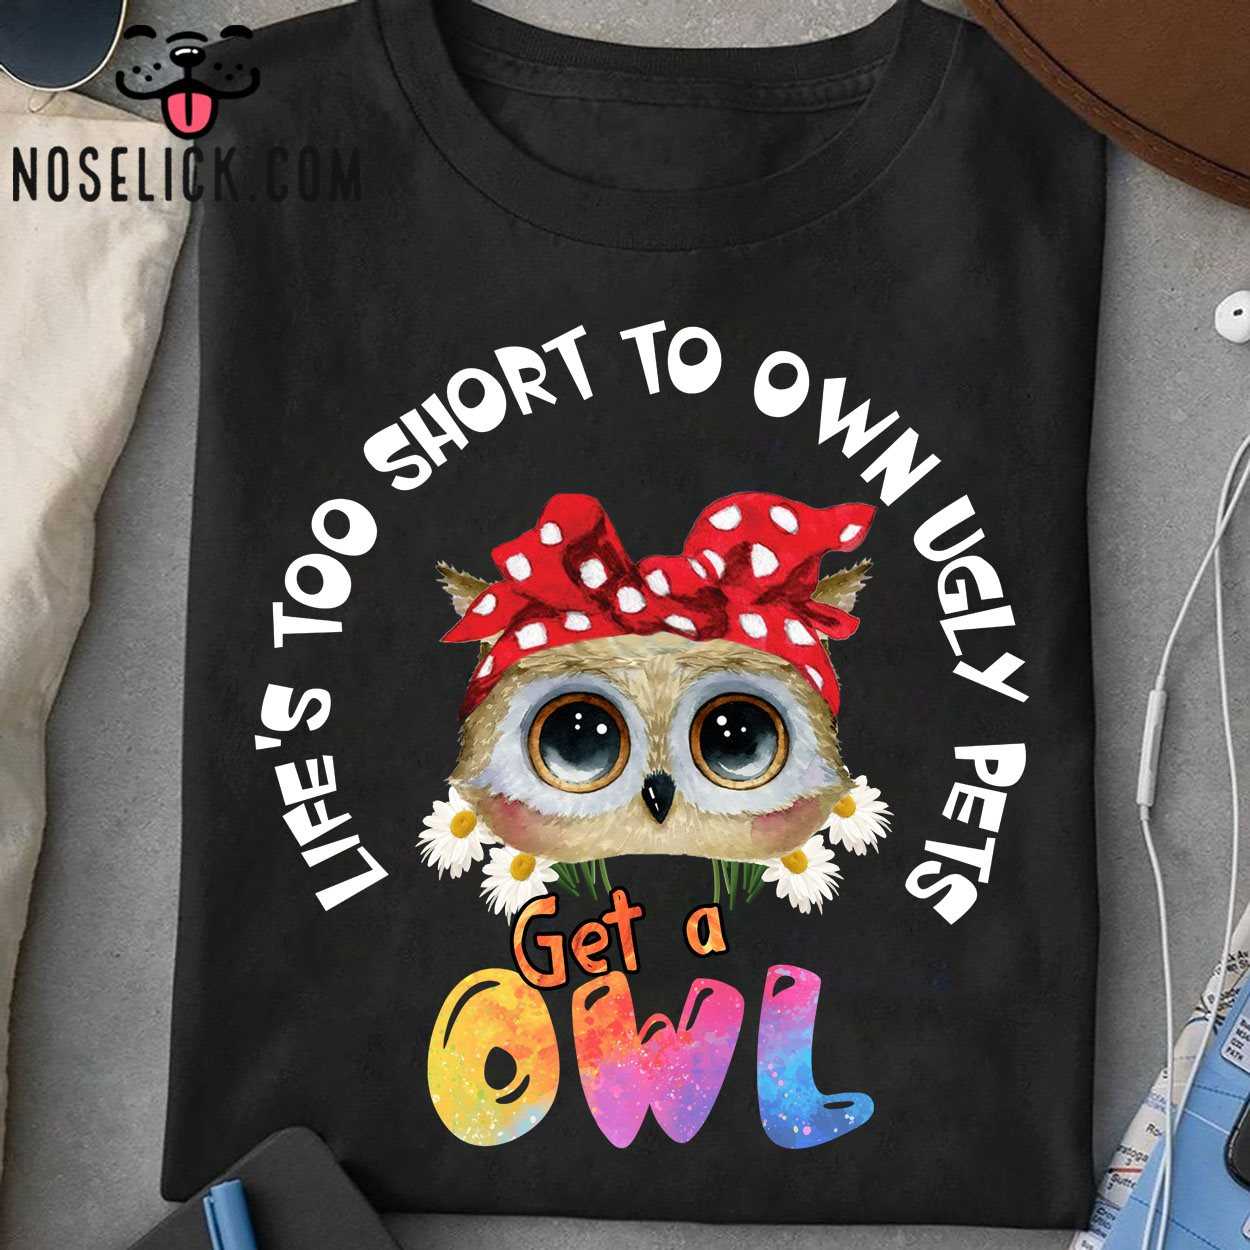 Pet Owls - Life's too short to own ugly pets get a owl